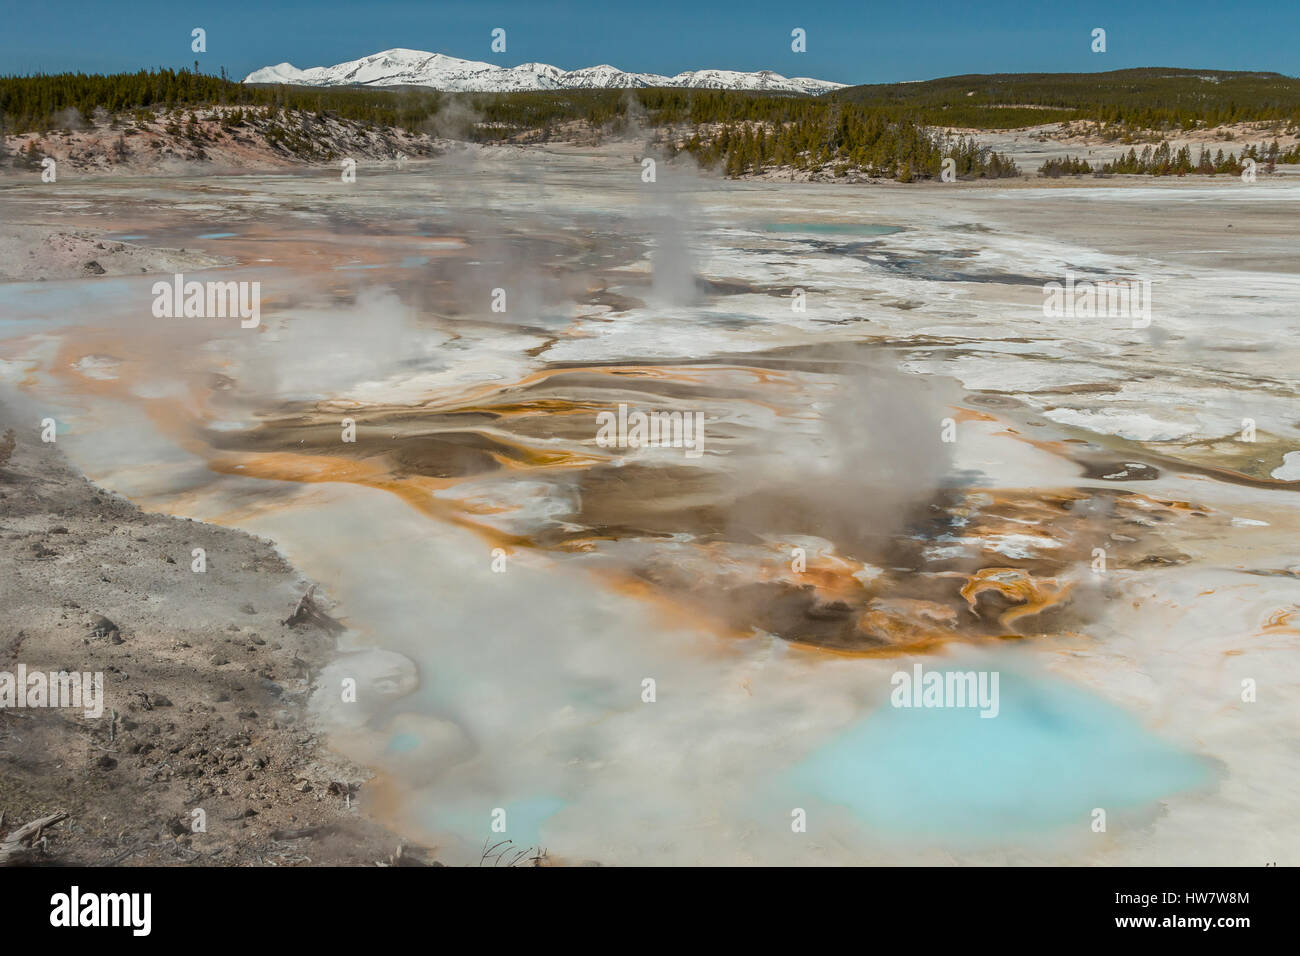 Porcelain Basin and Mt Holmes at Norris Geyser Basin in Yellowstone National Park, Wyoming. Stock Photo